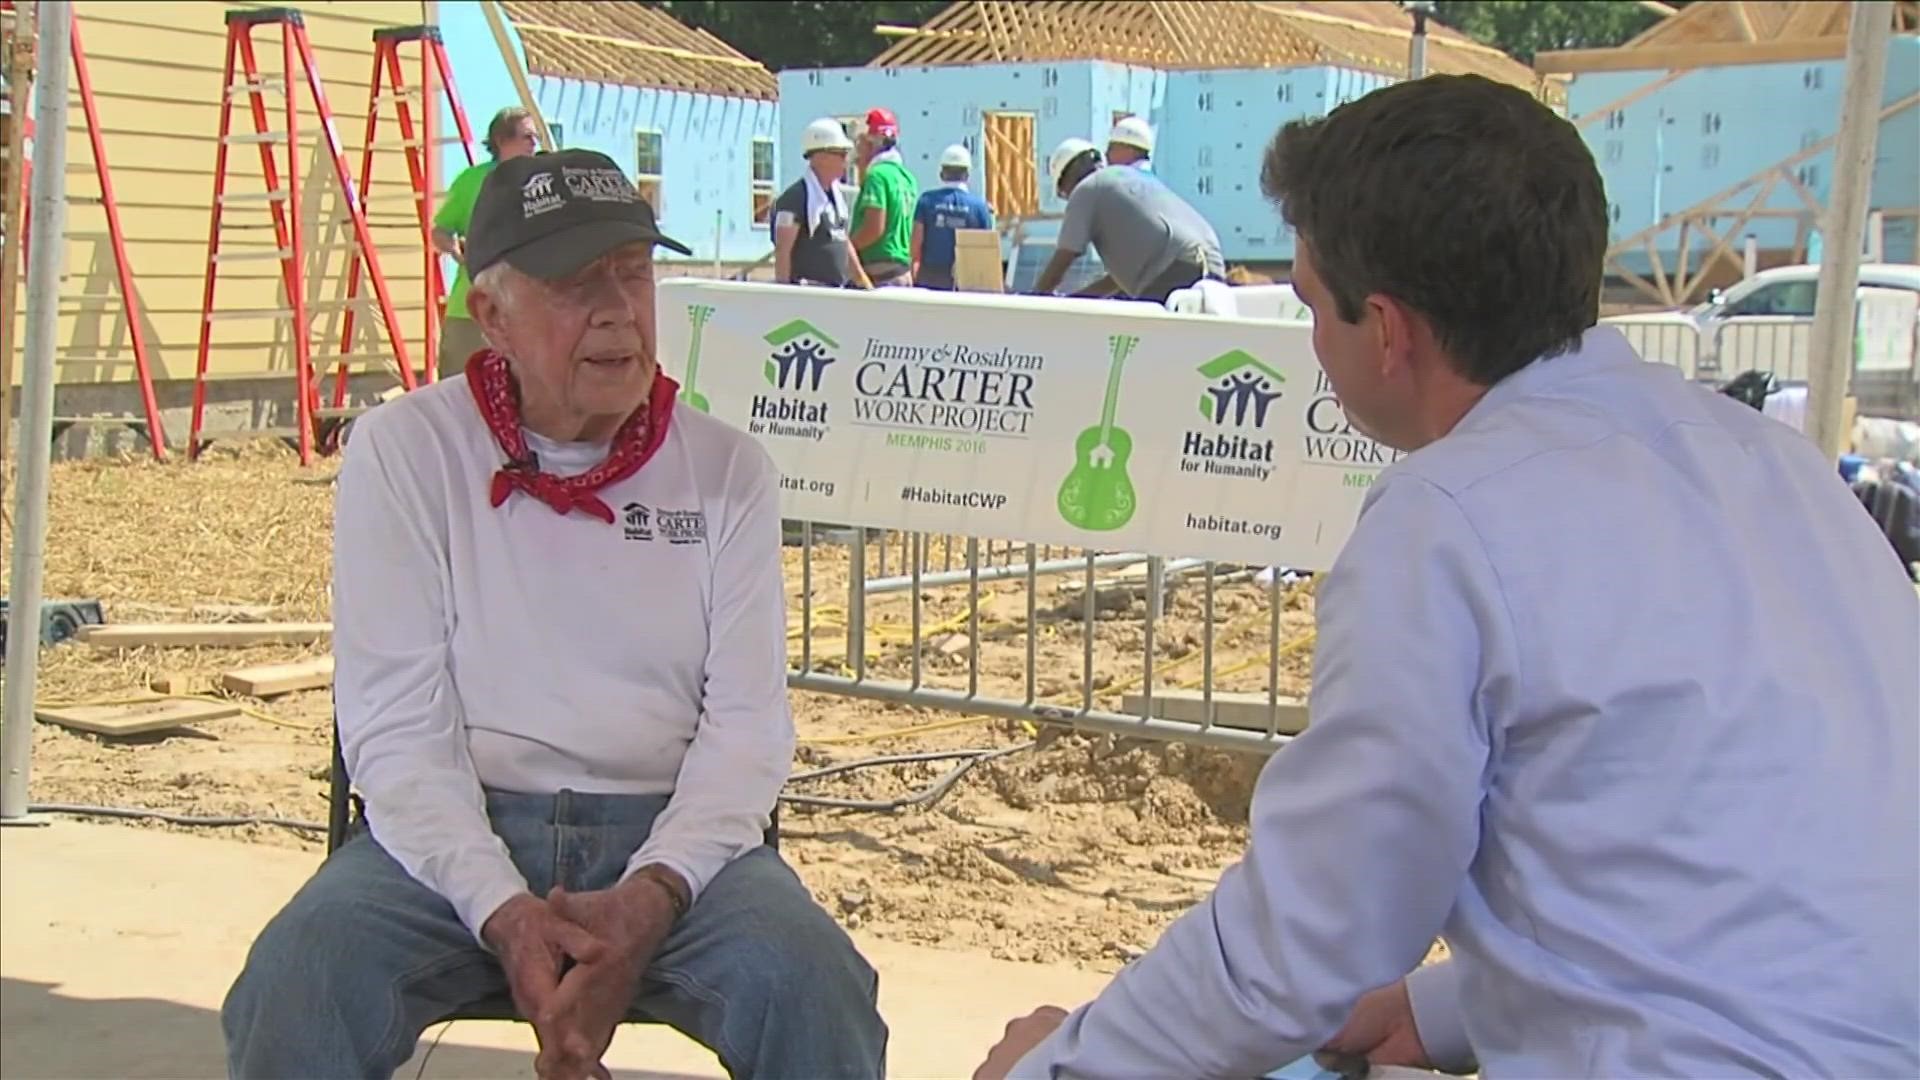 The 39th President — now in home hospice care — spearheaded a large Habitat For Humanity home build in the Memphis area in 2015 & 2016.